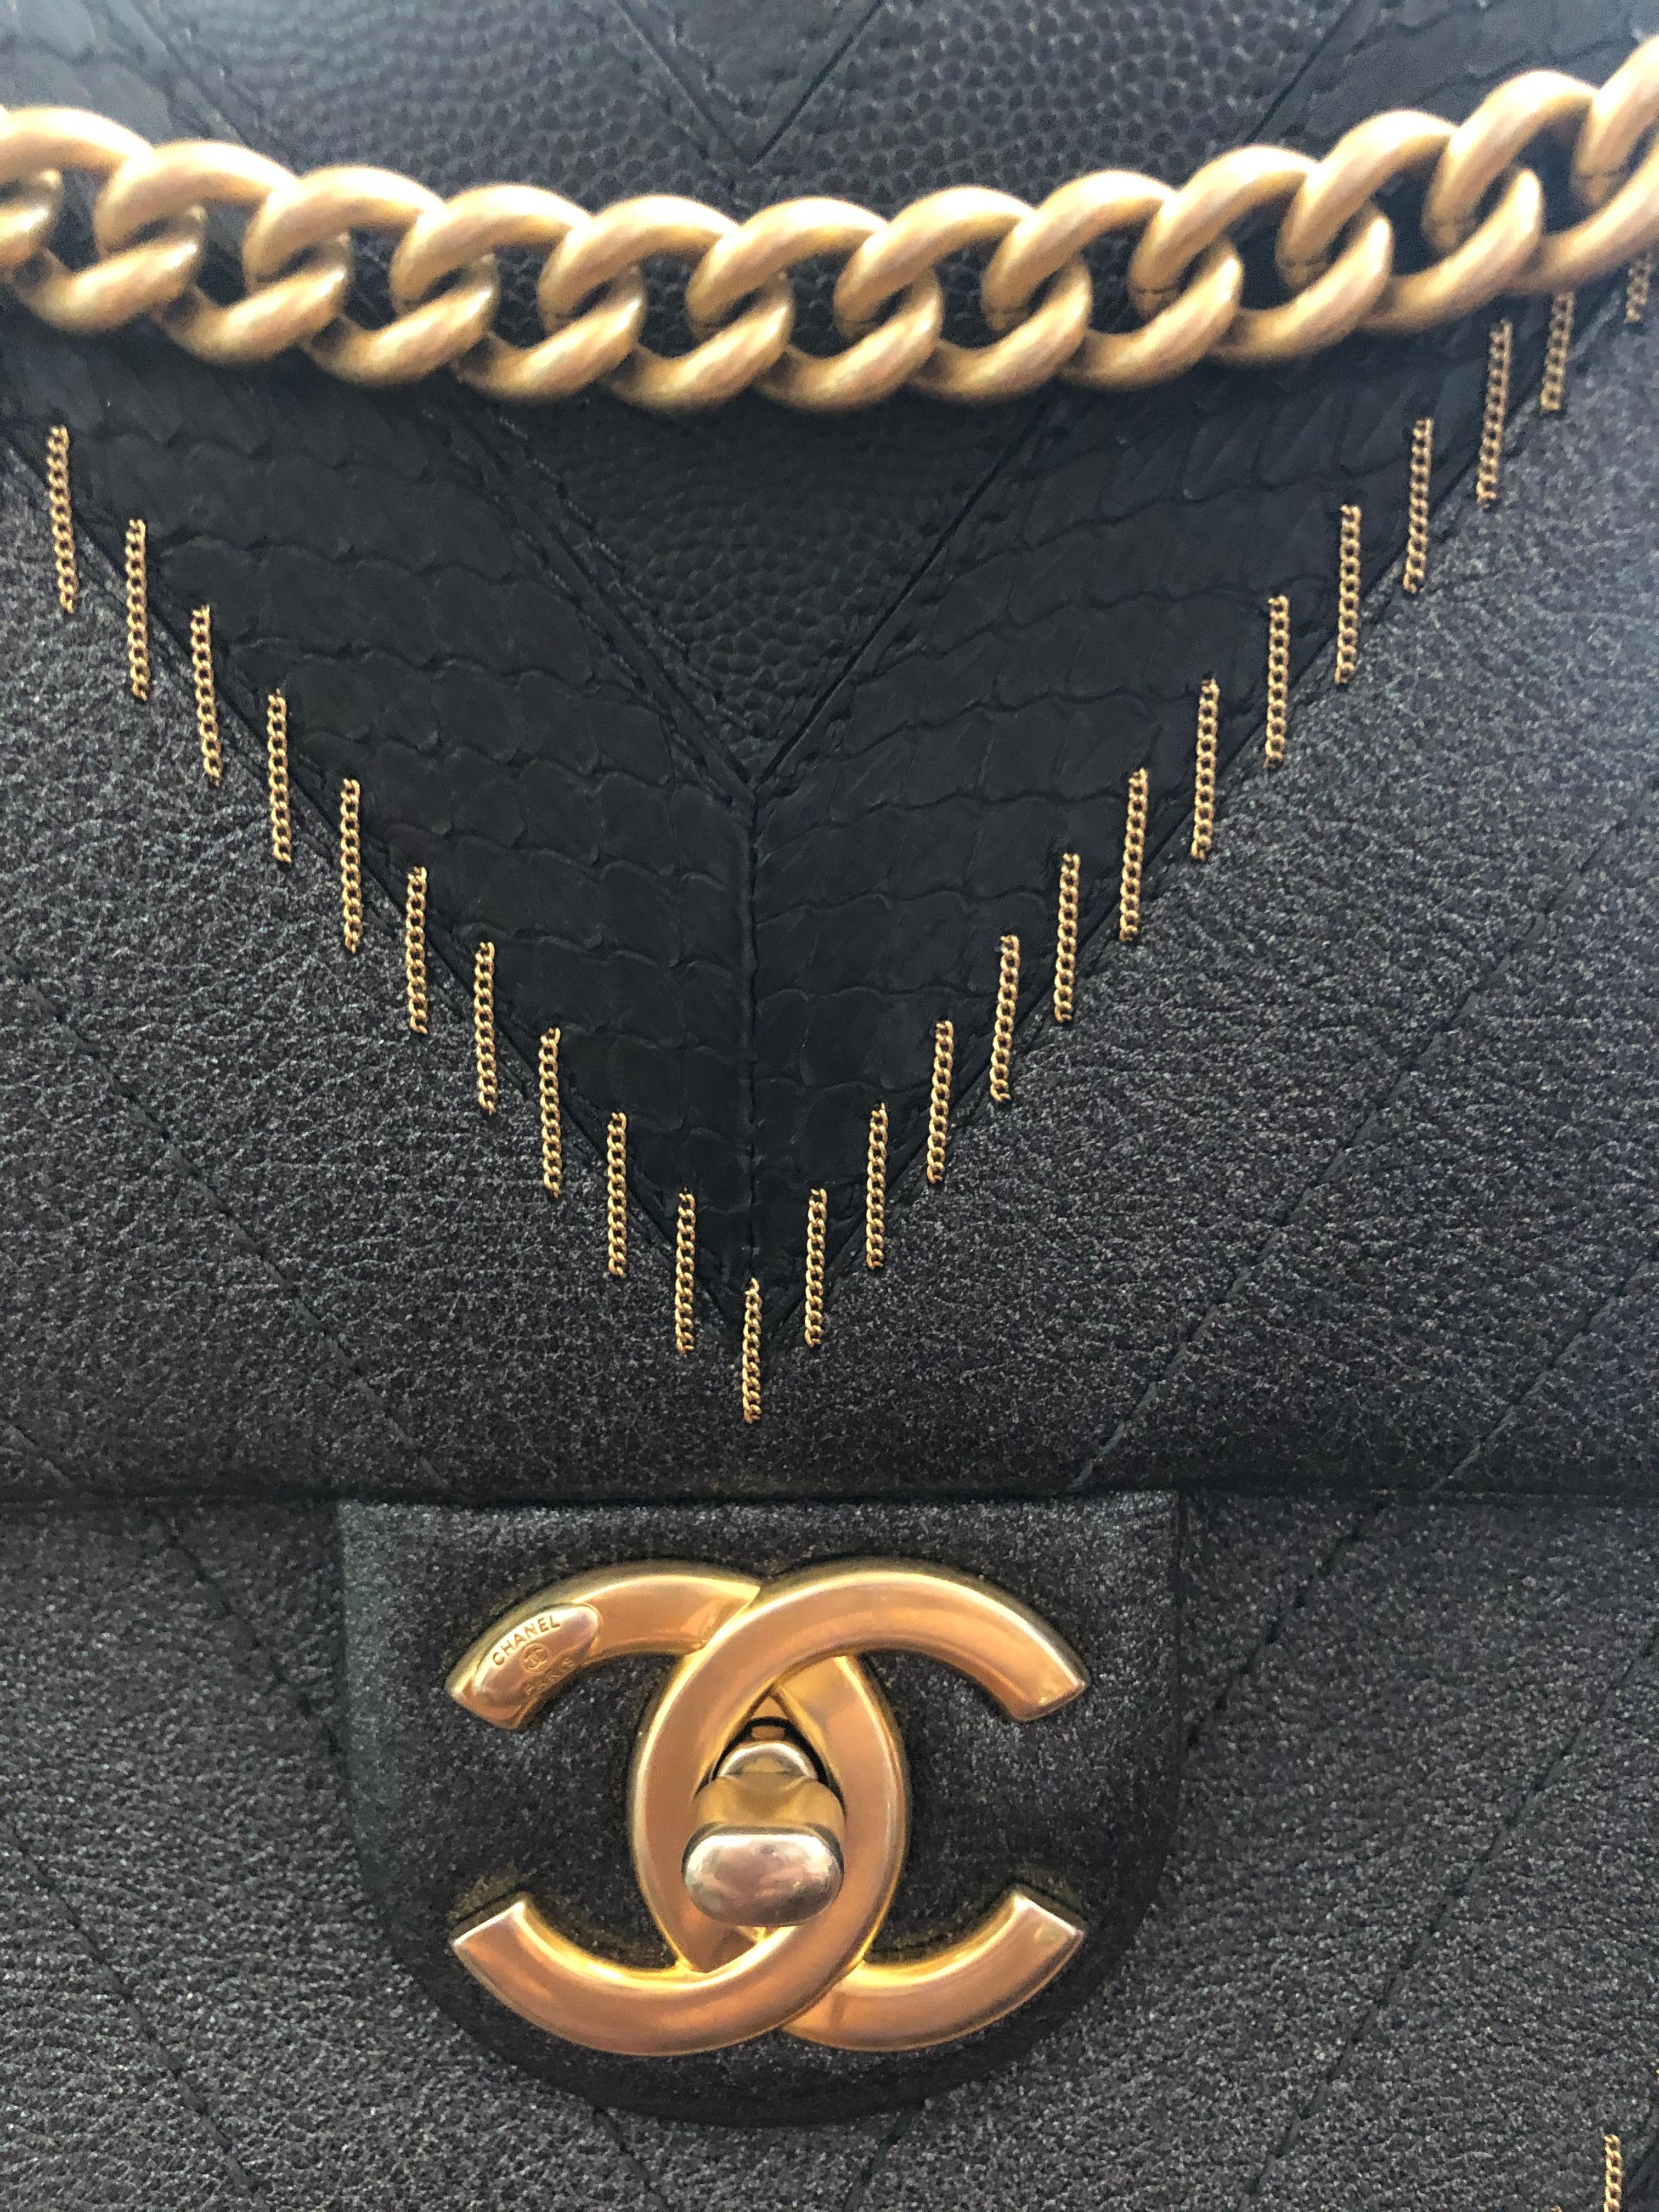 Snag yourself some rare Chanel with this amazing limited edition bag! Circa 2017, this rare find features Chevron stitching crafted from iridescent blue leather, black python, and Chanel's signature black caviar leather. Includes delicate gold